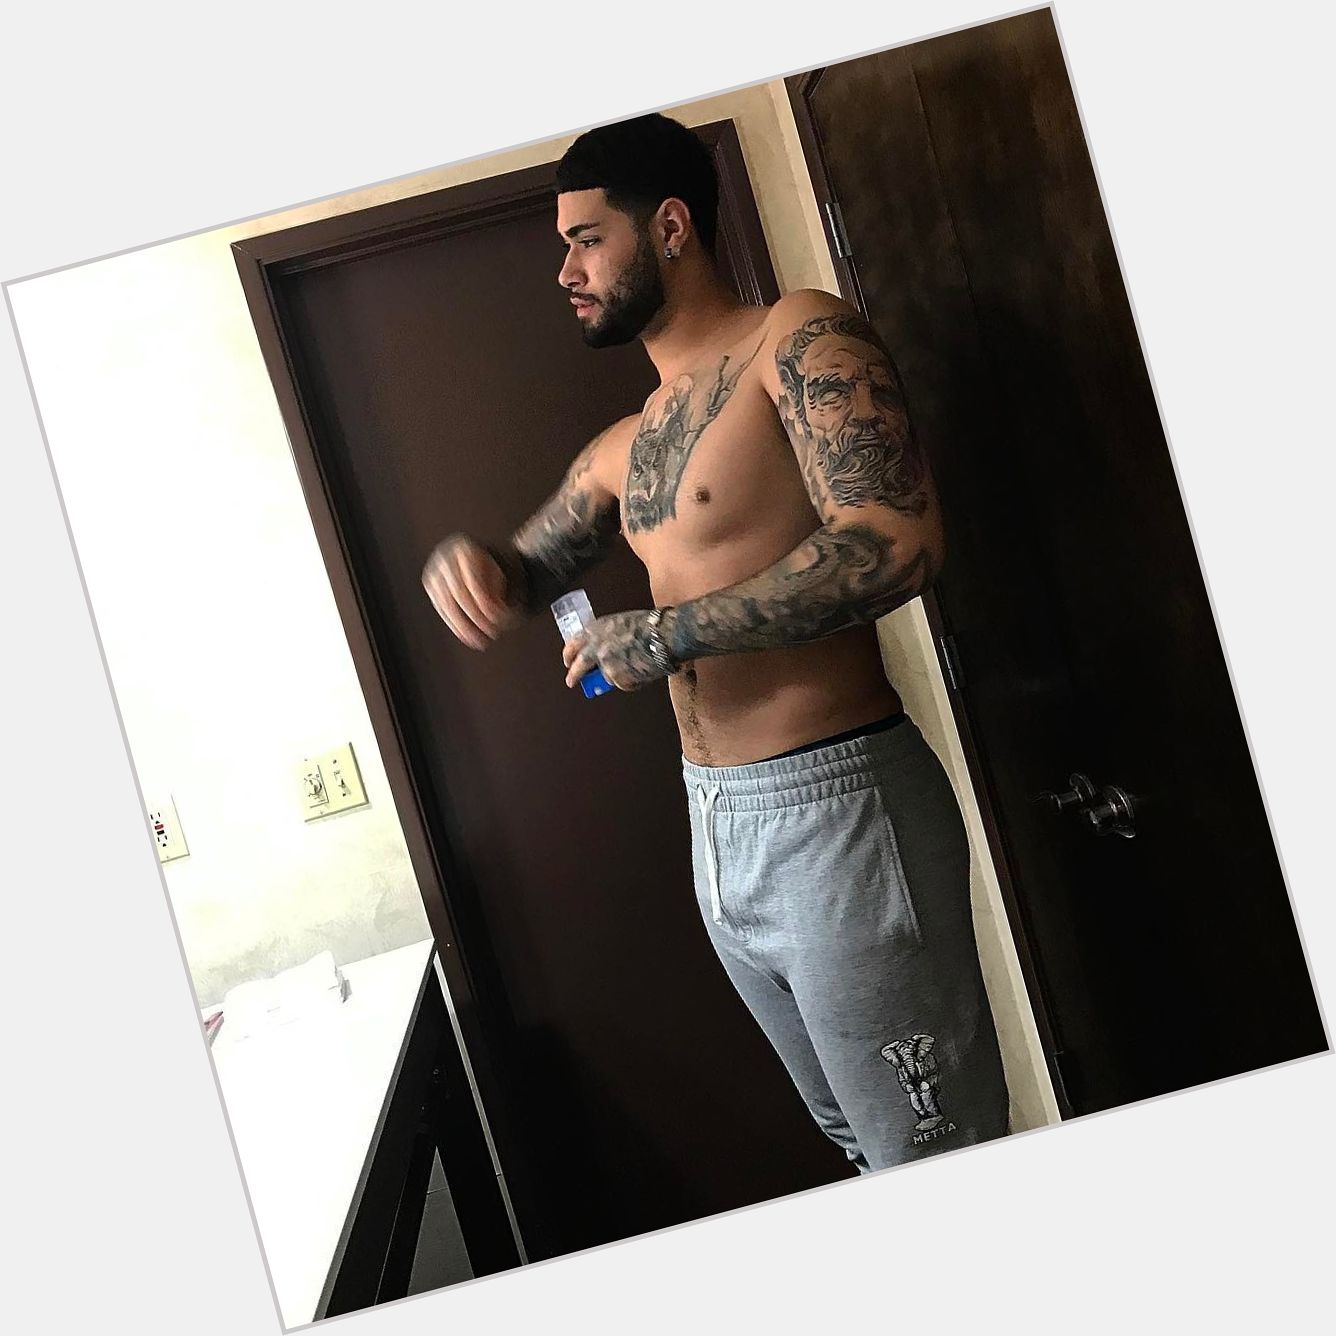 Http://fanpagepress.net/m/R/Ronnie Banks Dating 2